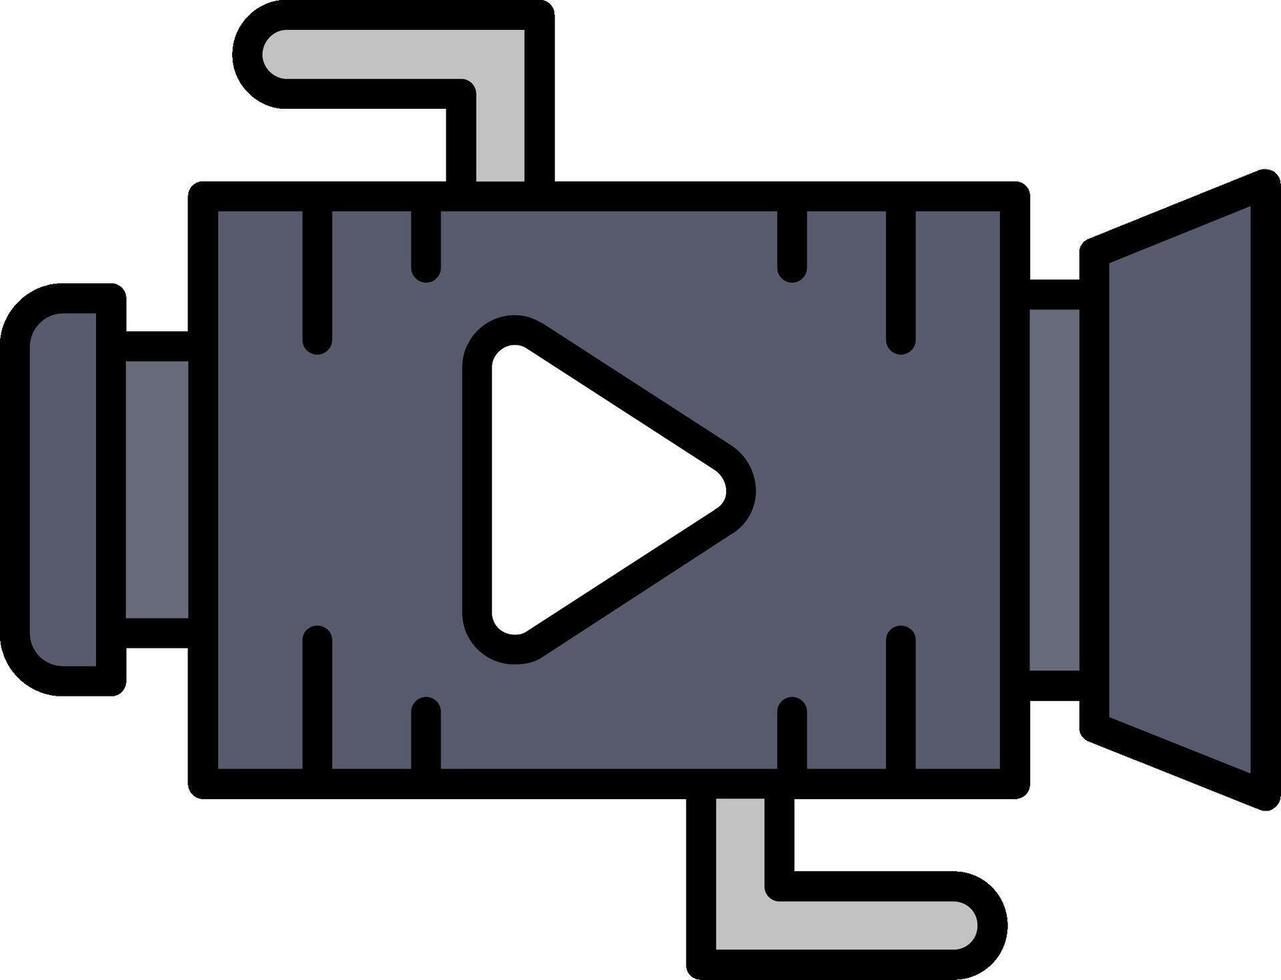 Camera Line Filled Icon vector